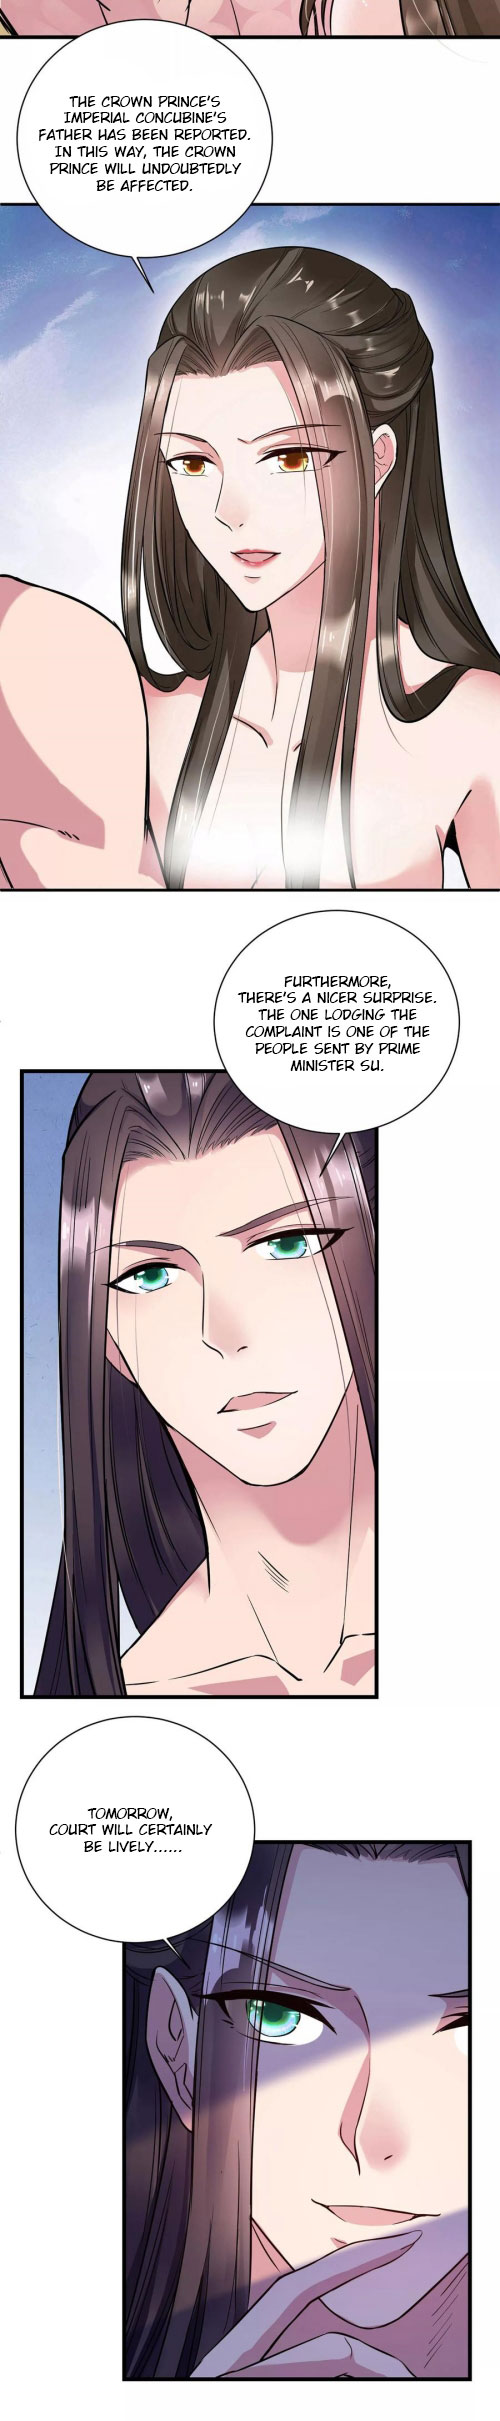 The Emperor Is Afraid That the Princess Will Have the World Ch. 23